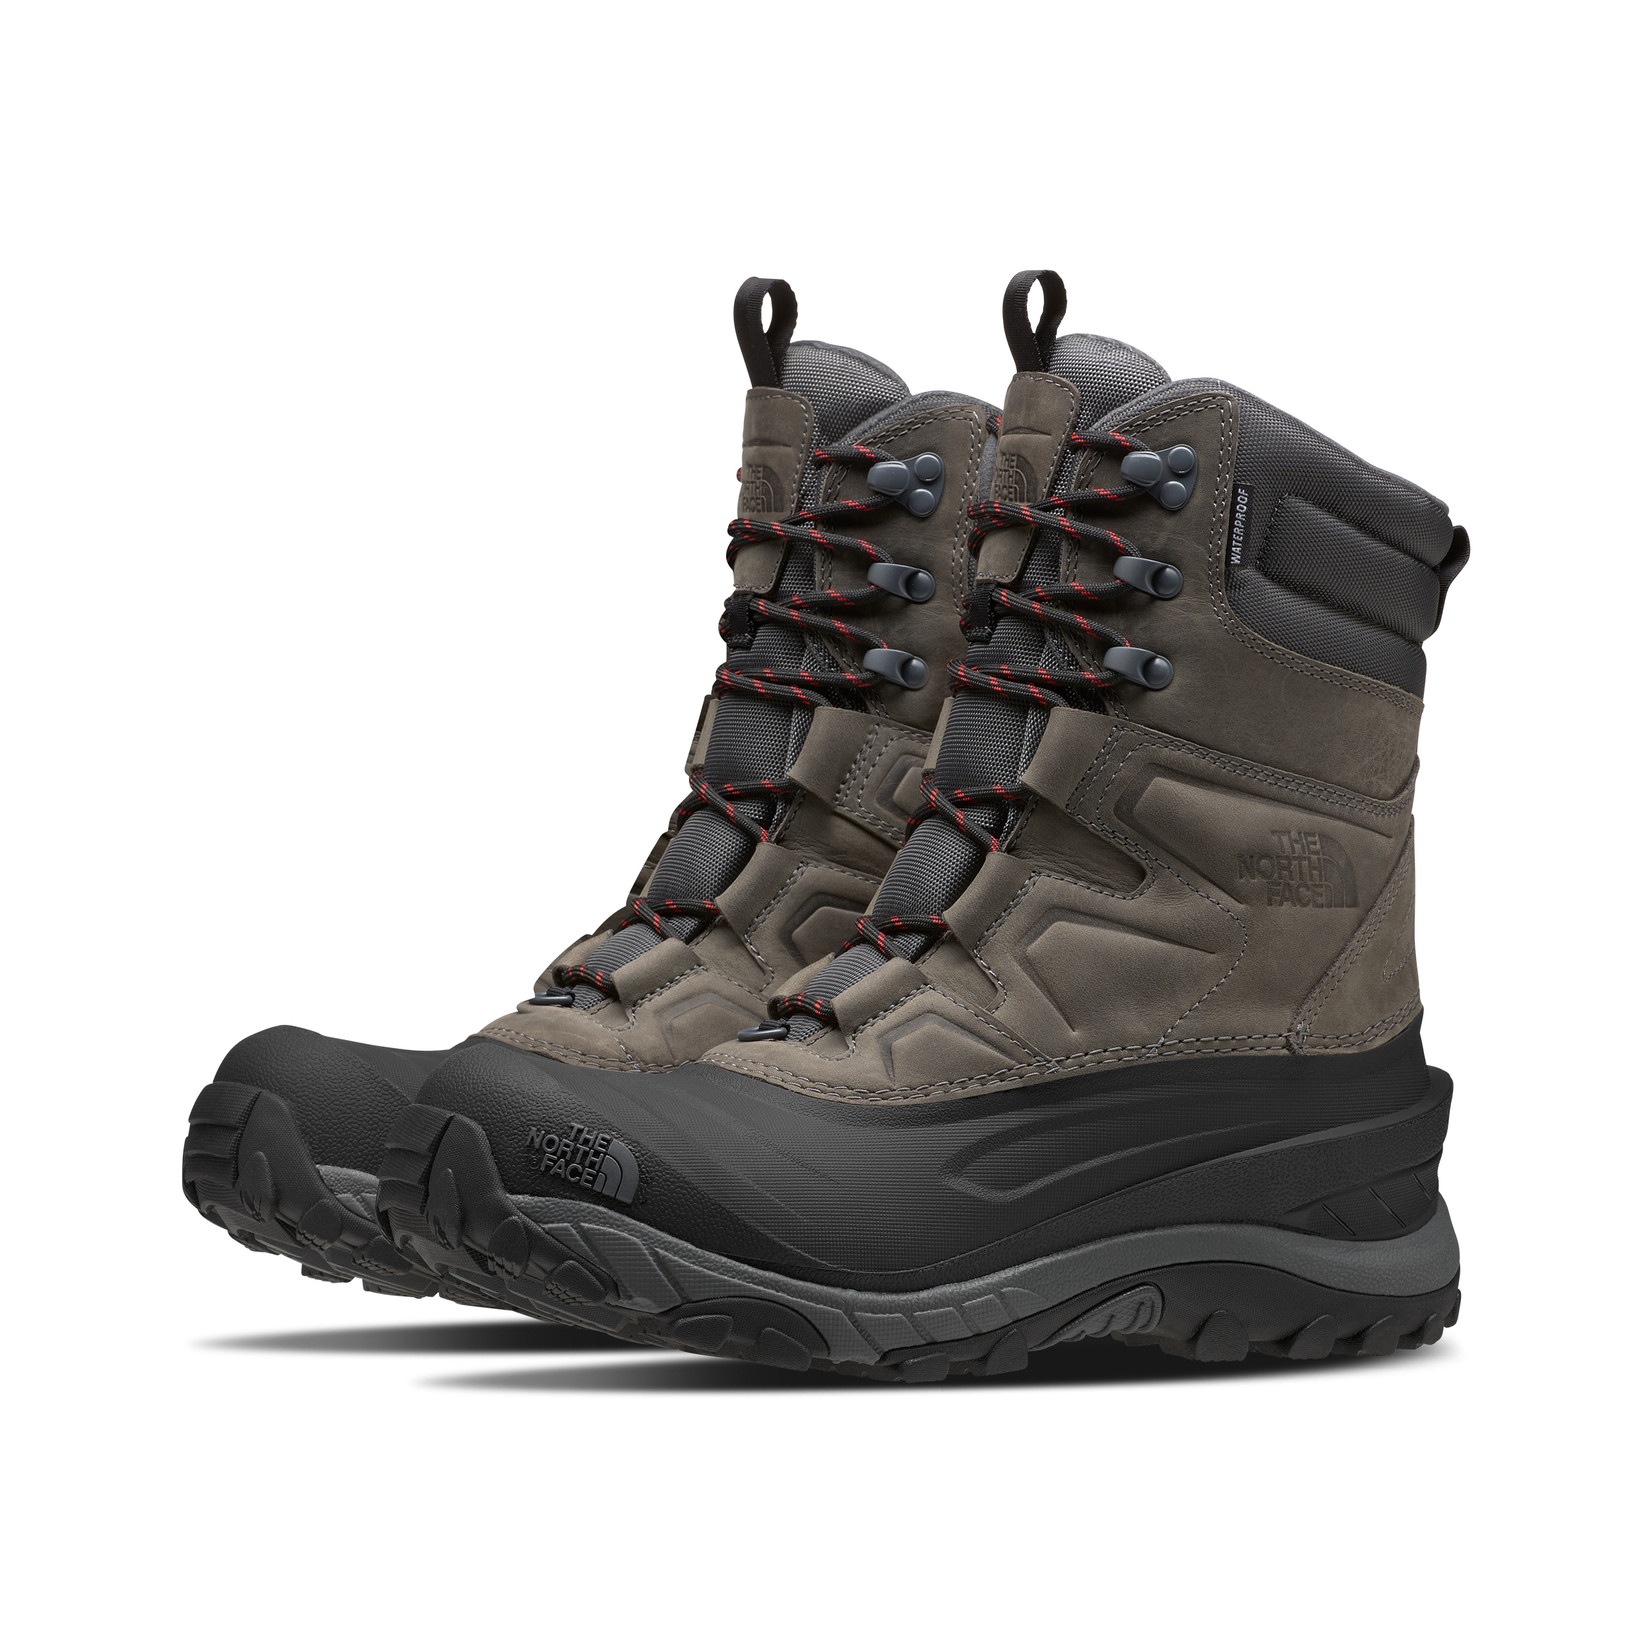 The North Face The North Face Men’s Chilkat 400 Boots